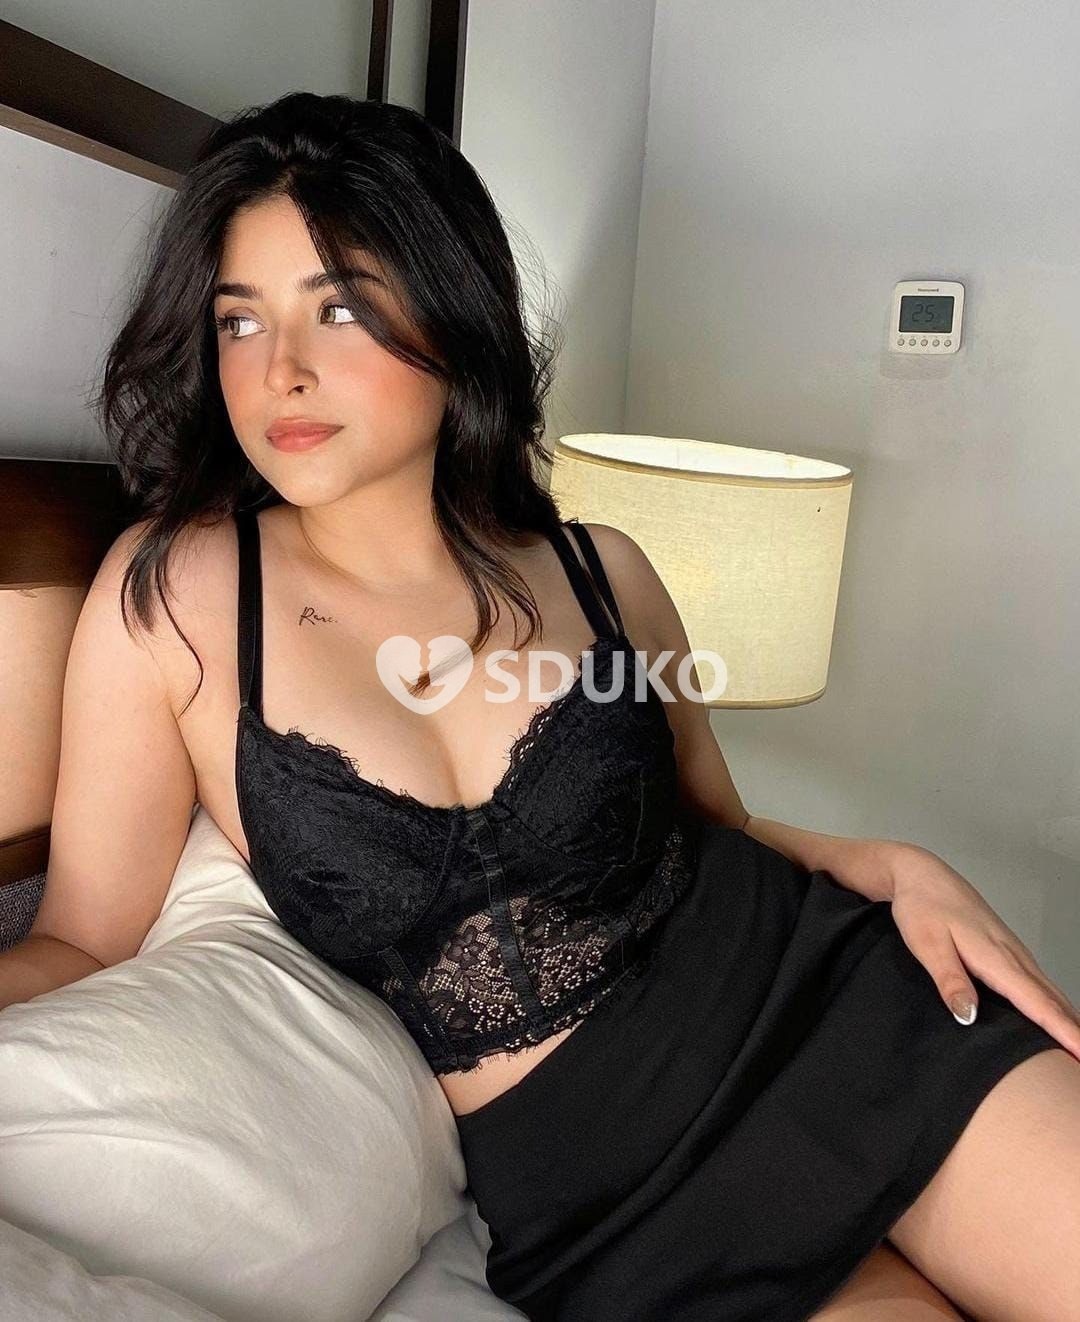 Lb nagar.       ..✅ 24x7 AFFORDABLE CHEAPEST RATE SAFE CALL GIRL SERVICE AVAILABLE OUTCALL AVAILABLE..